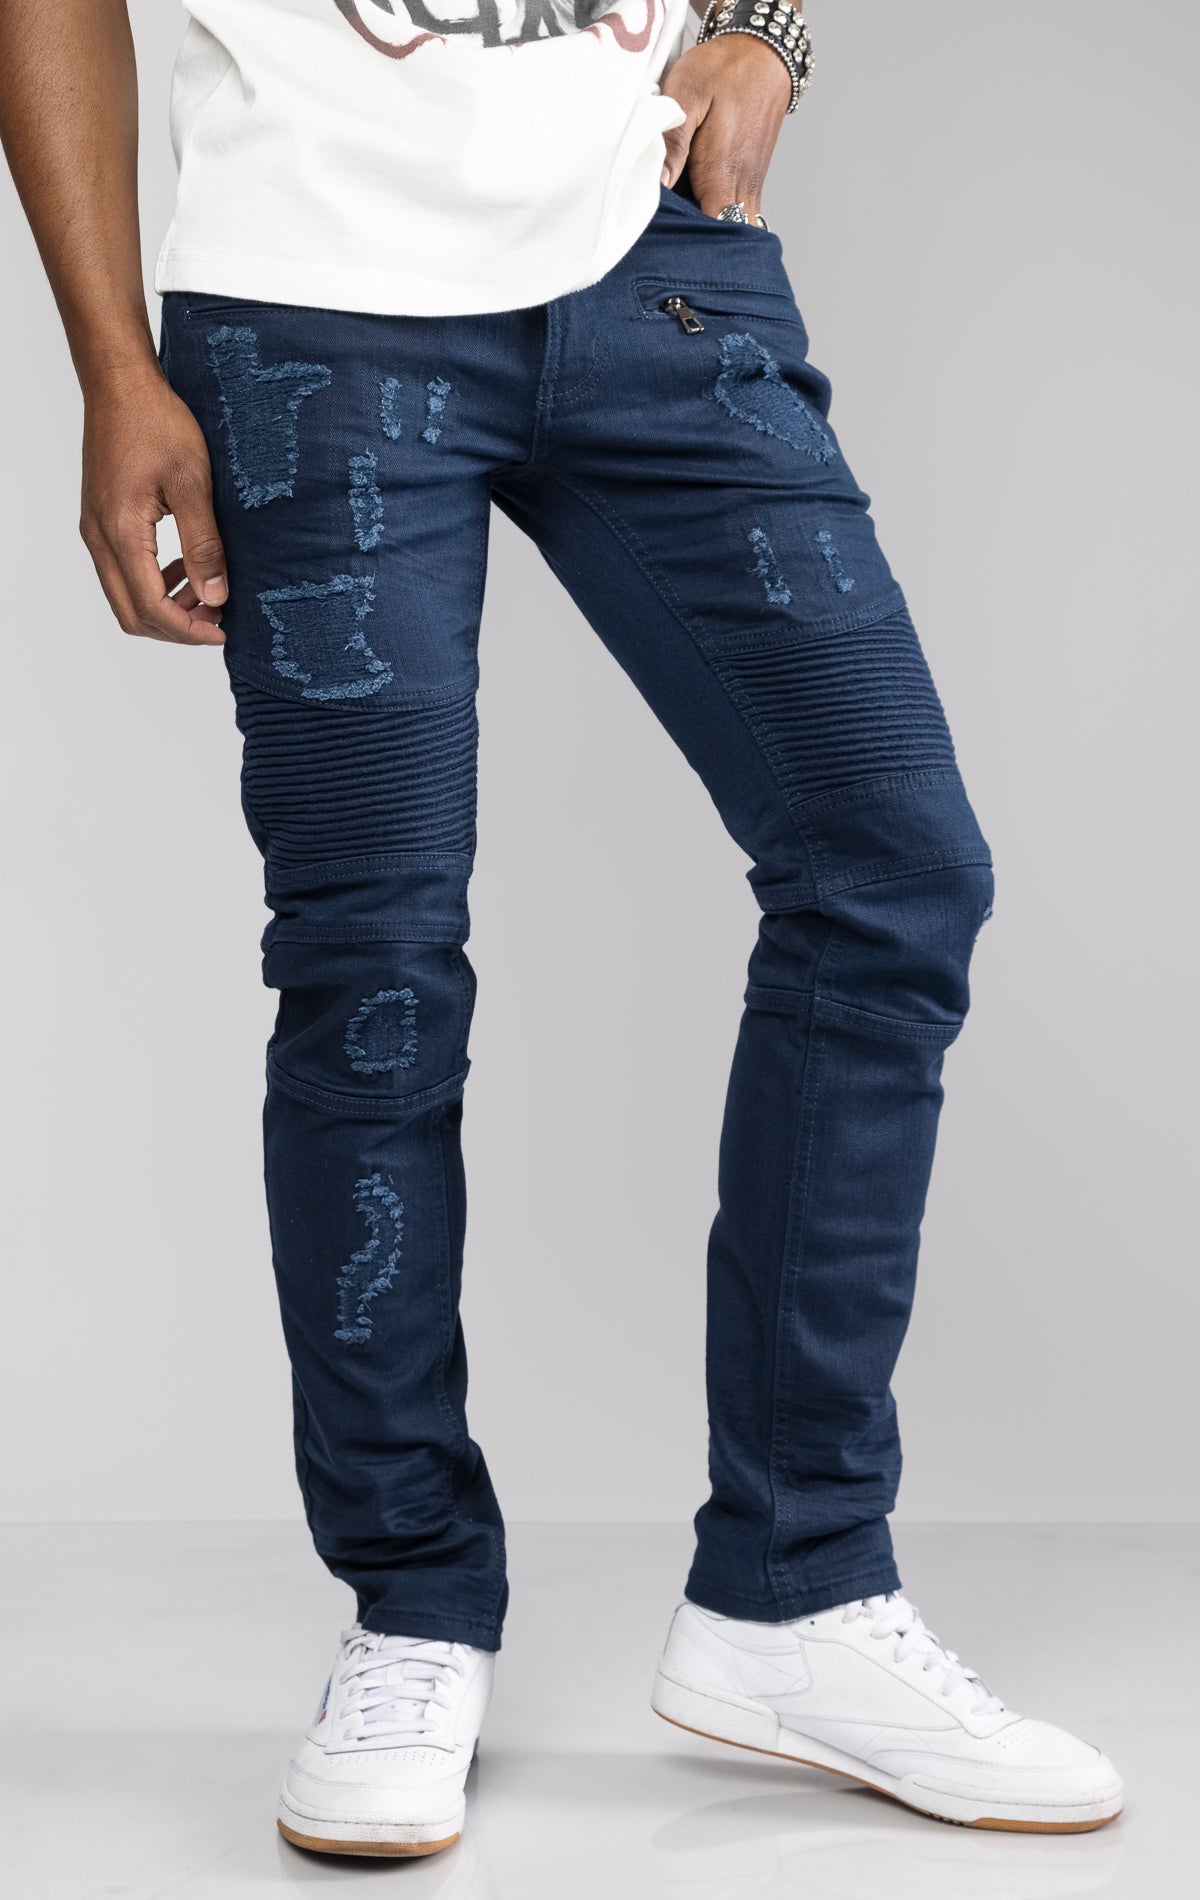 Navy Slim fit denim jeans with rip and repair details made from 98% cotton and 2% spandex.